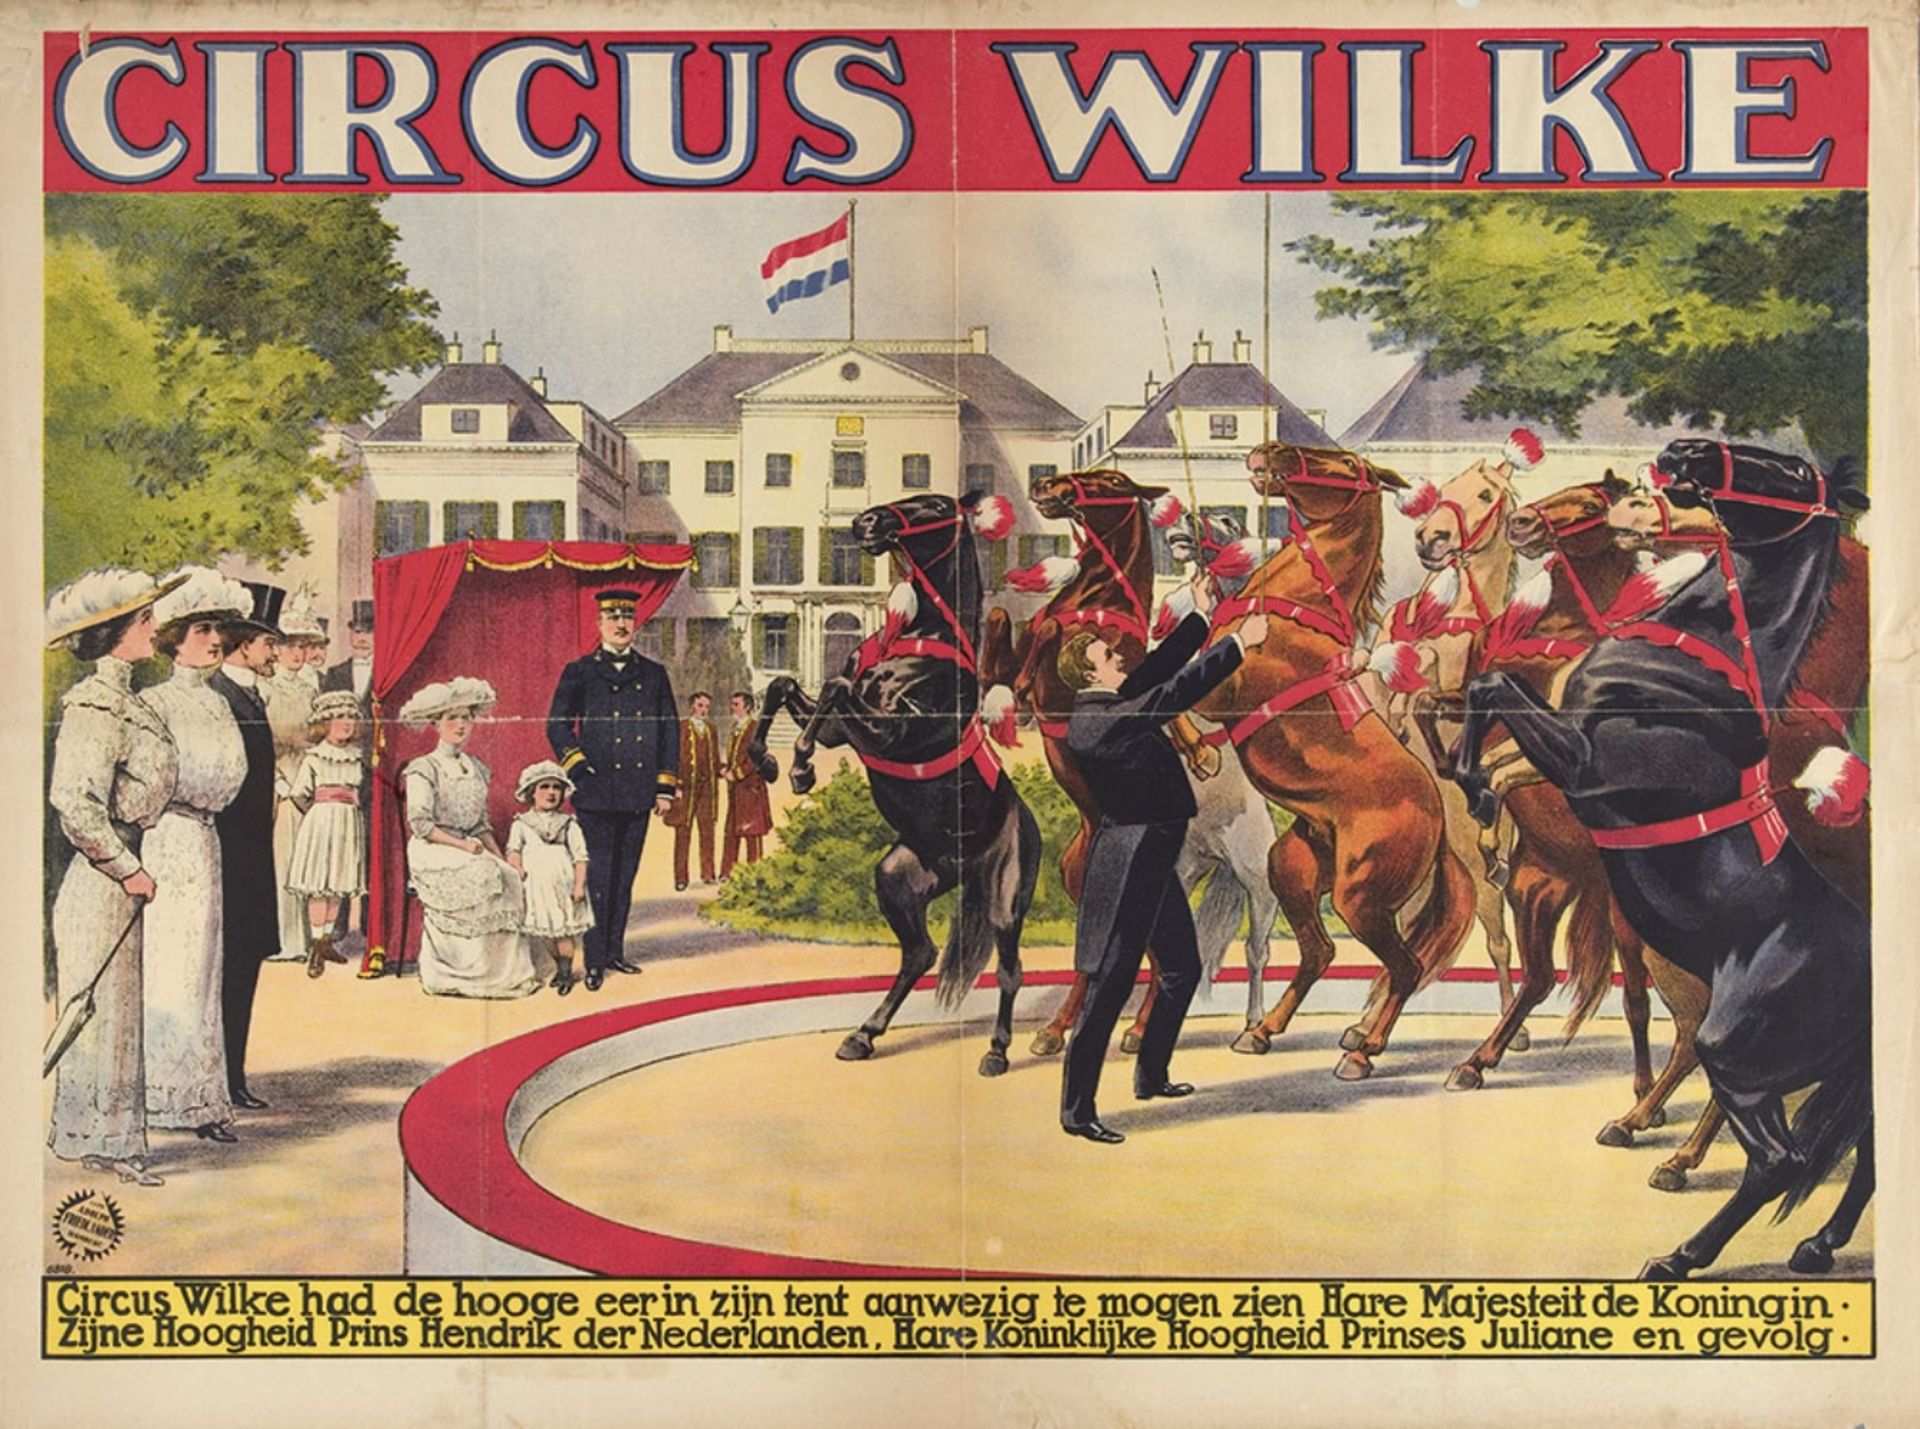 [Het Loo Palace. Wilke] "Circus Wilke performing for the Dutch Royal Family" - Image 7 of 7